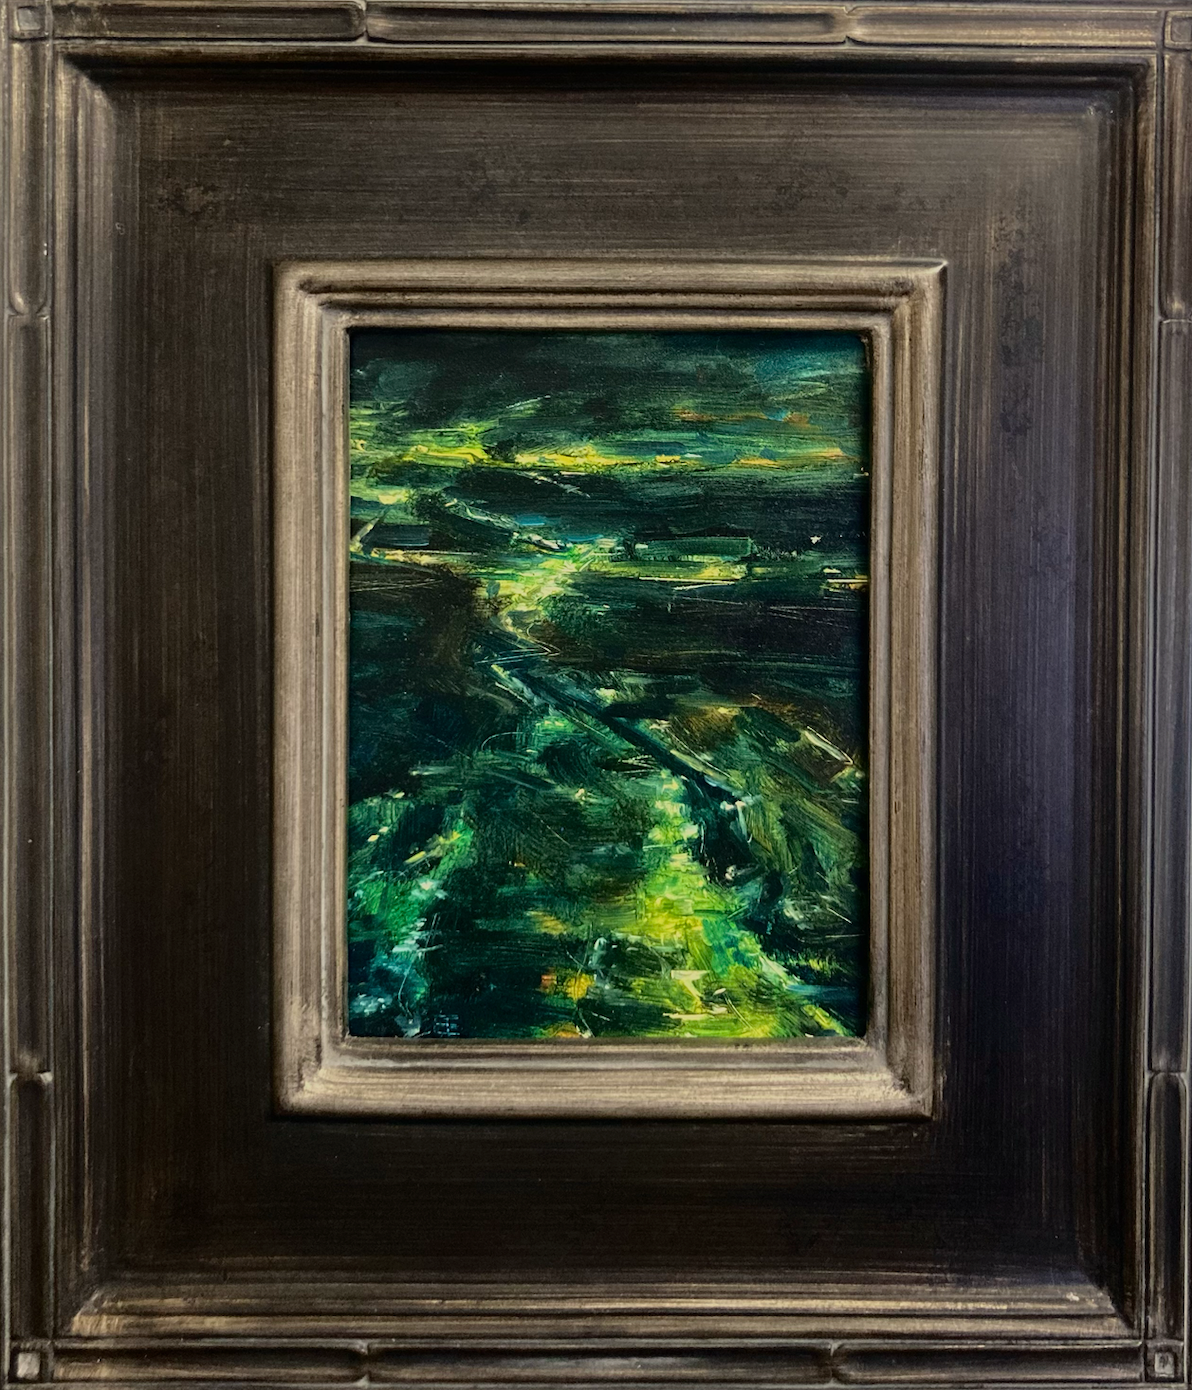 Abstract oil painting in green shades titled 'East End' by E. E. Jacks with light wood frame